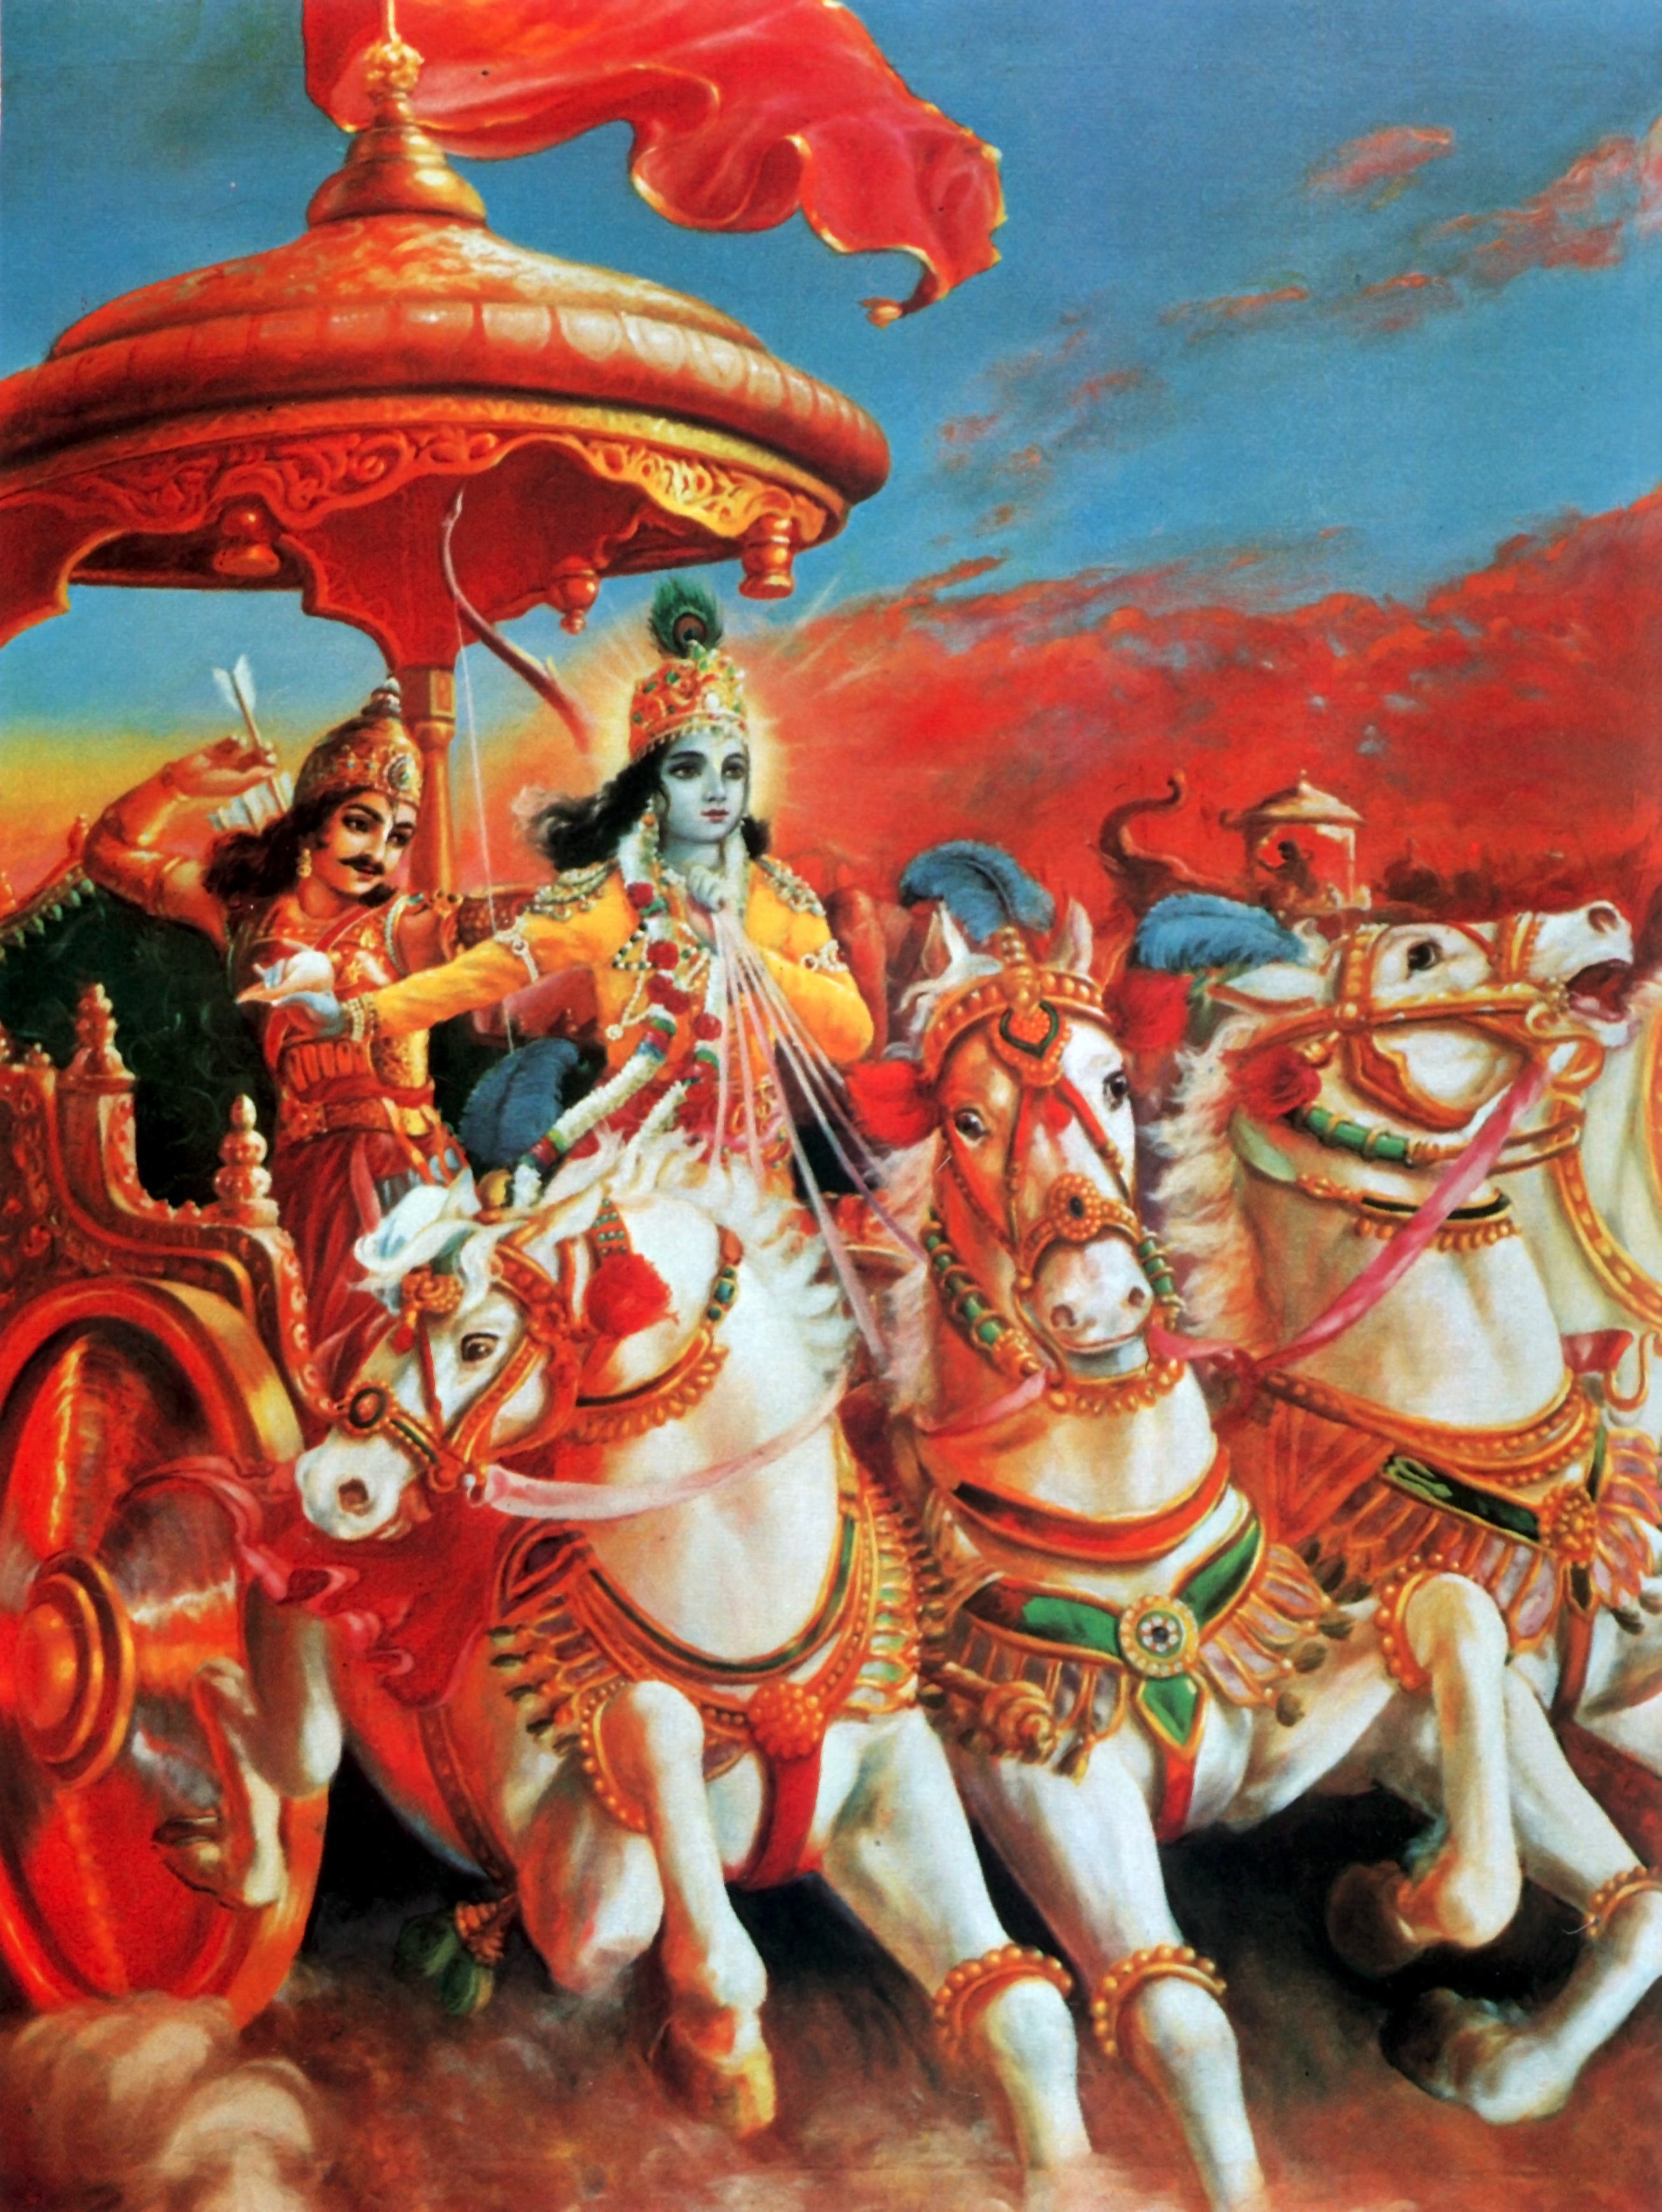 Bhagavad Gita: Wherever there is Krishna and Arjuna there will certainly be opulence, victory, extraordinary power and morality.